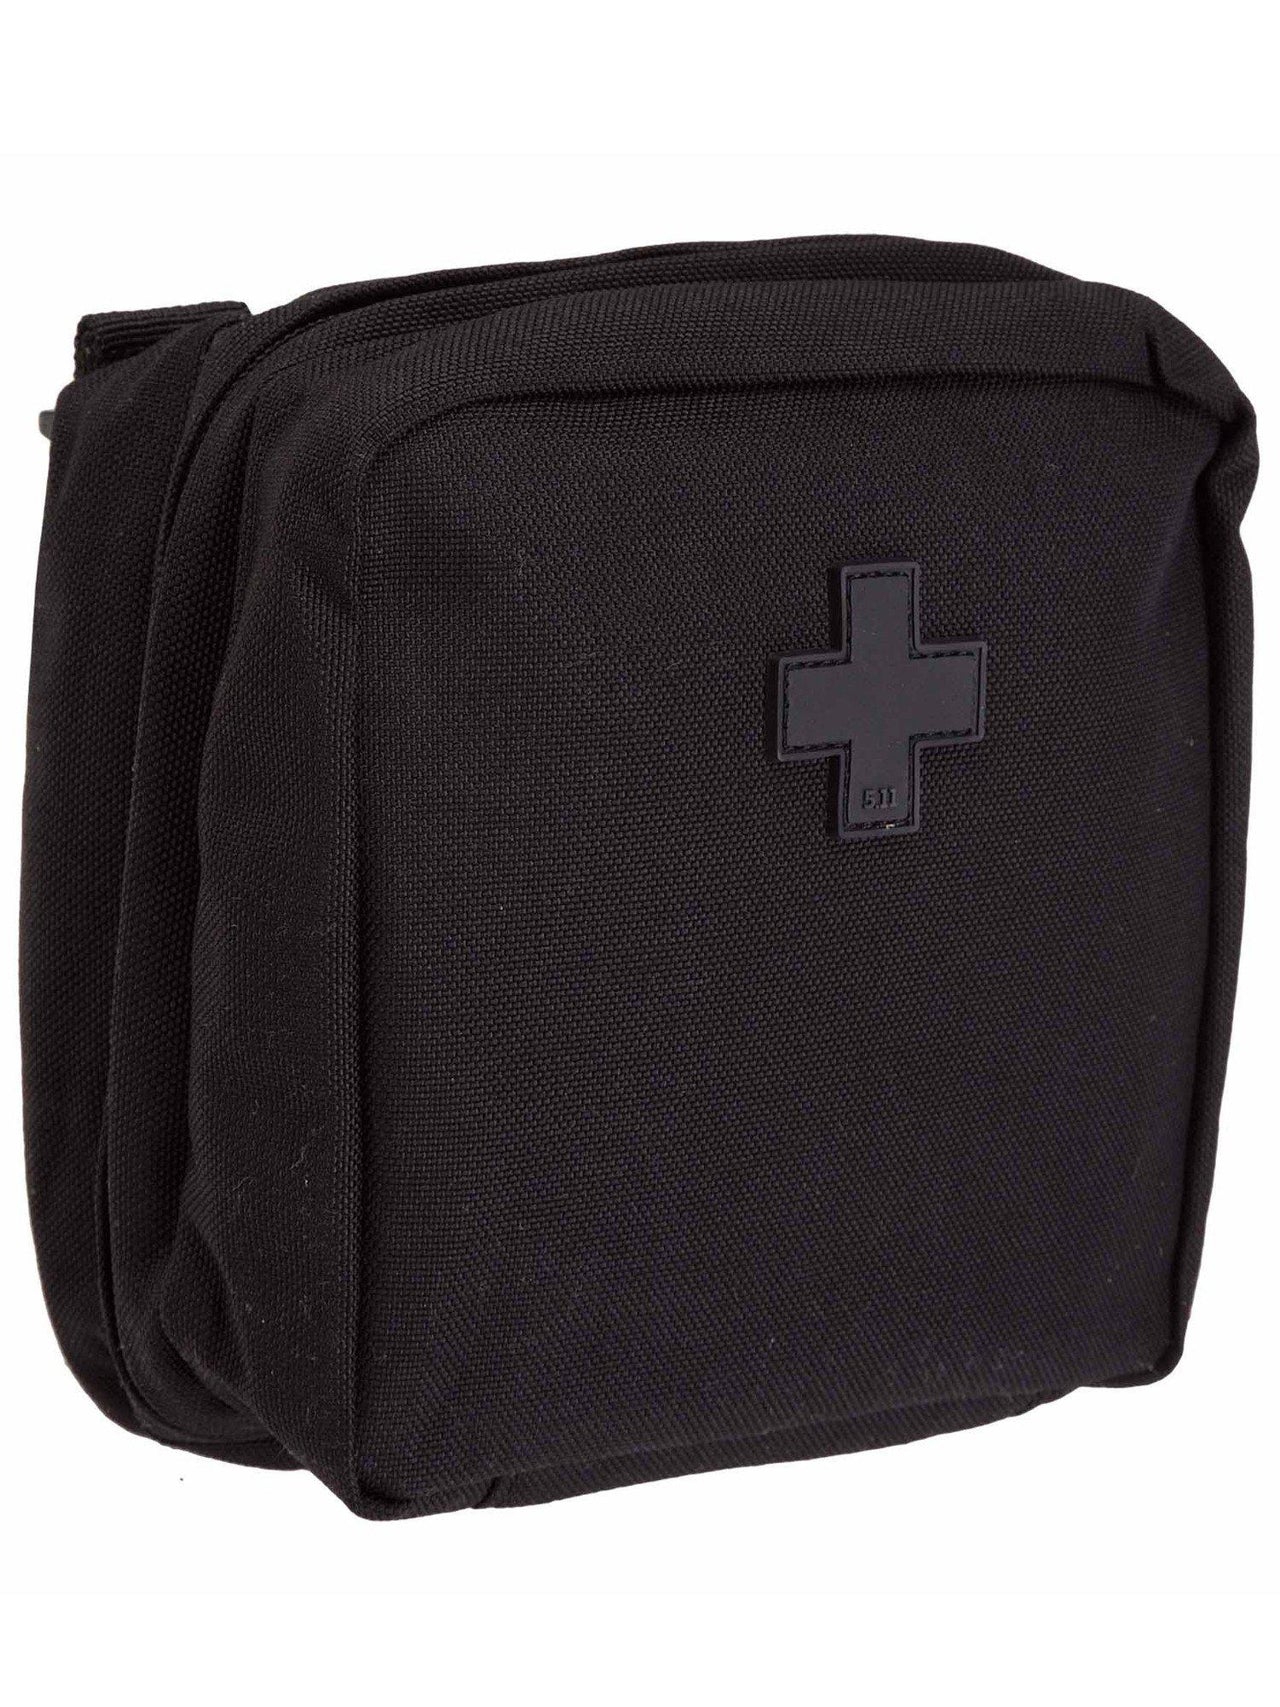 5.11 Tactical 6x6 Med Pouch - TacSource